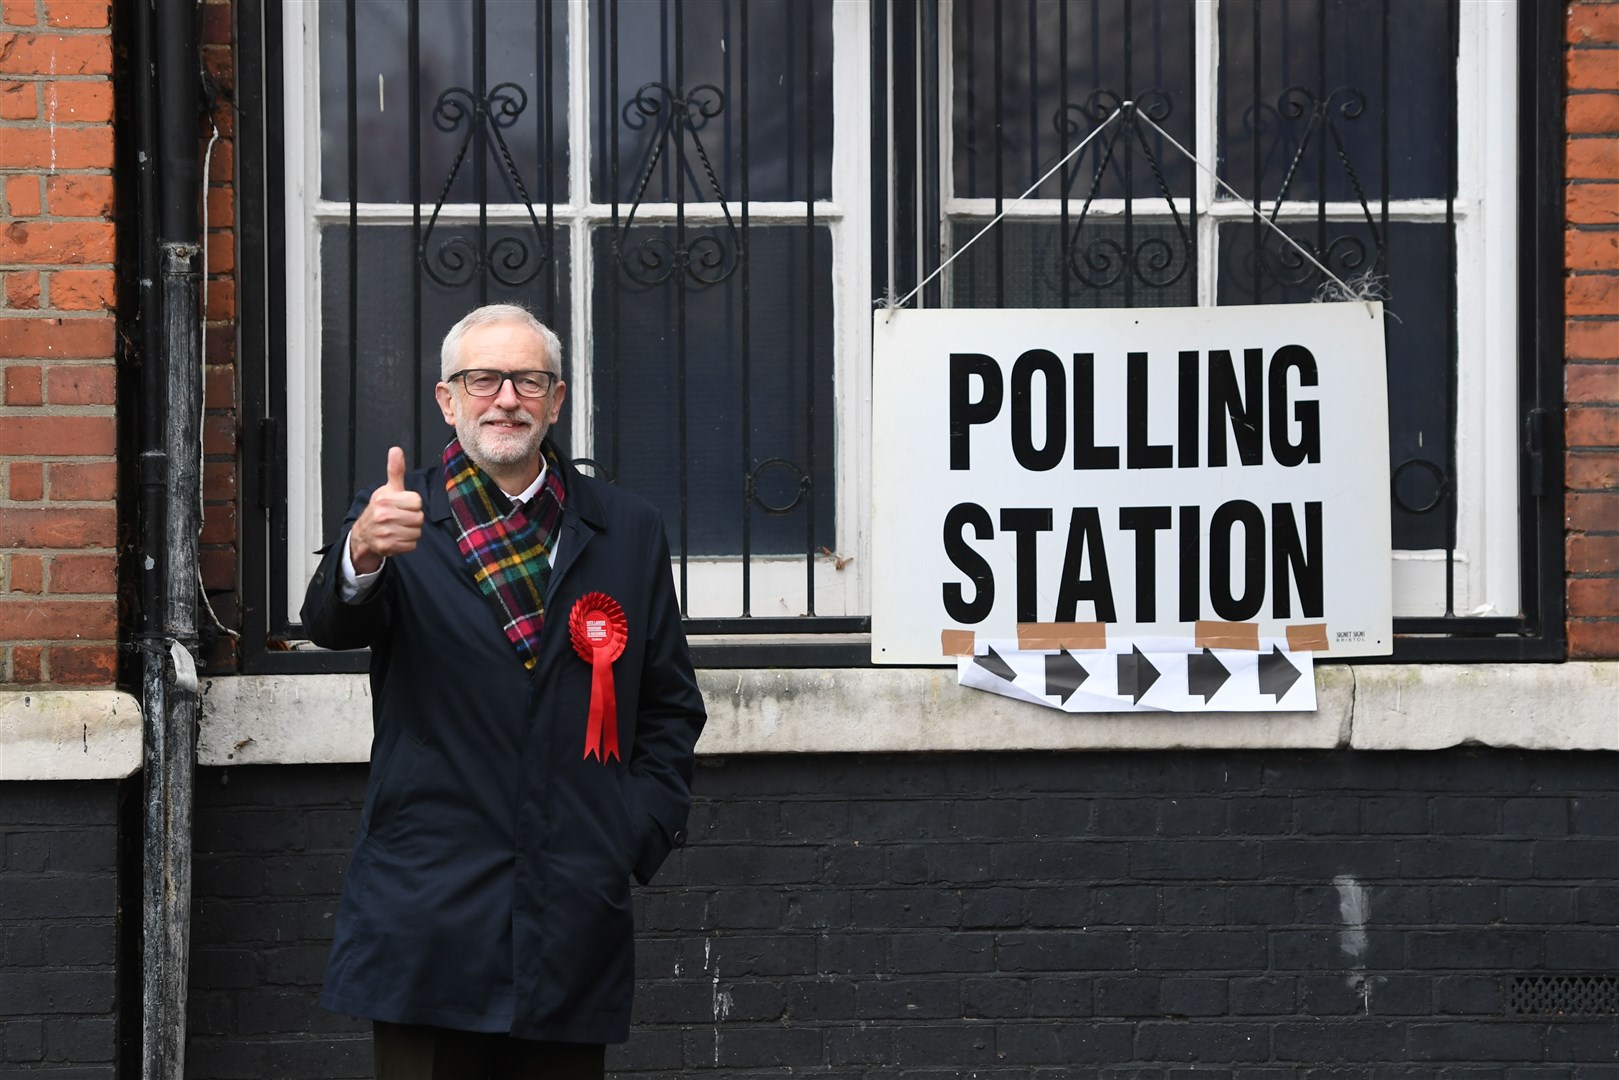 Jeremy Corbyn gives a thumbs- up after casting his vote in the 2019 general election (Joe Giddens/PA)